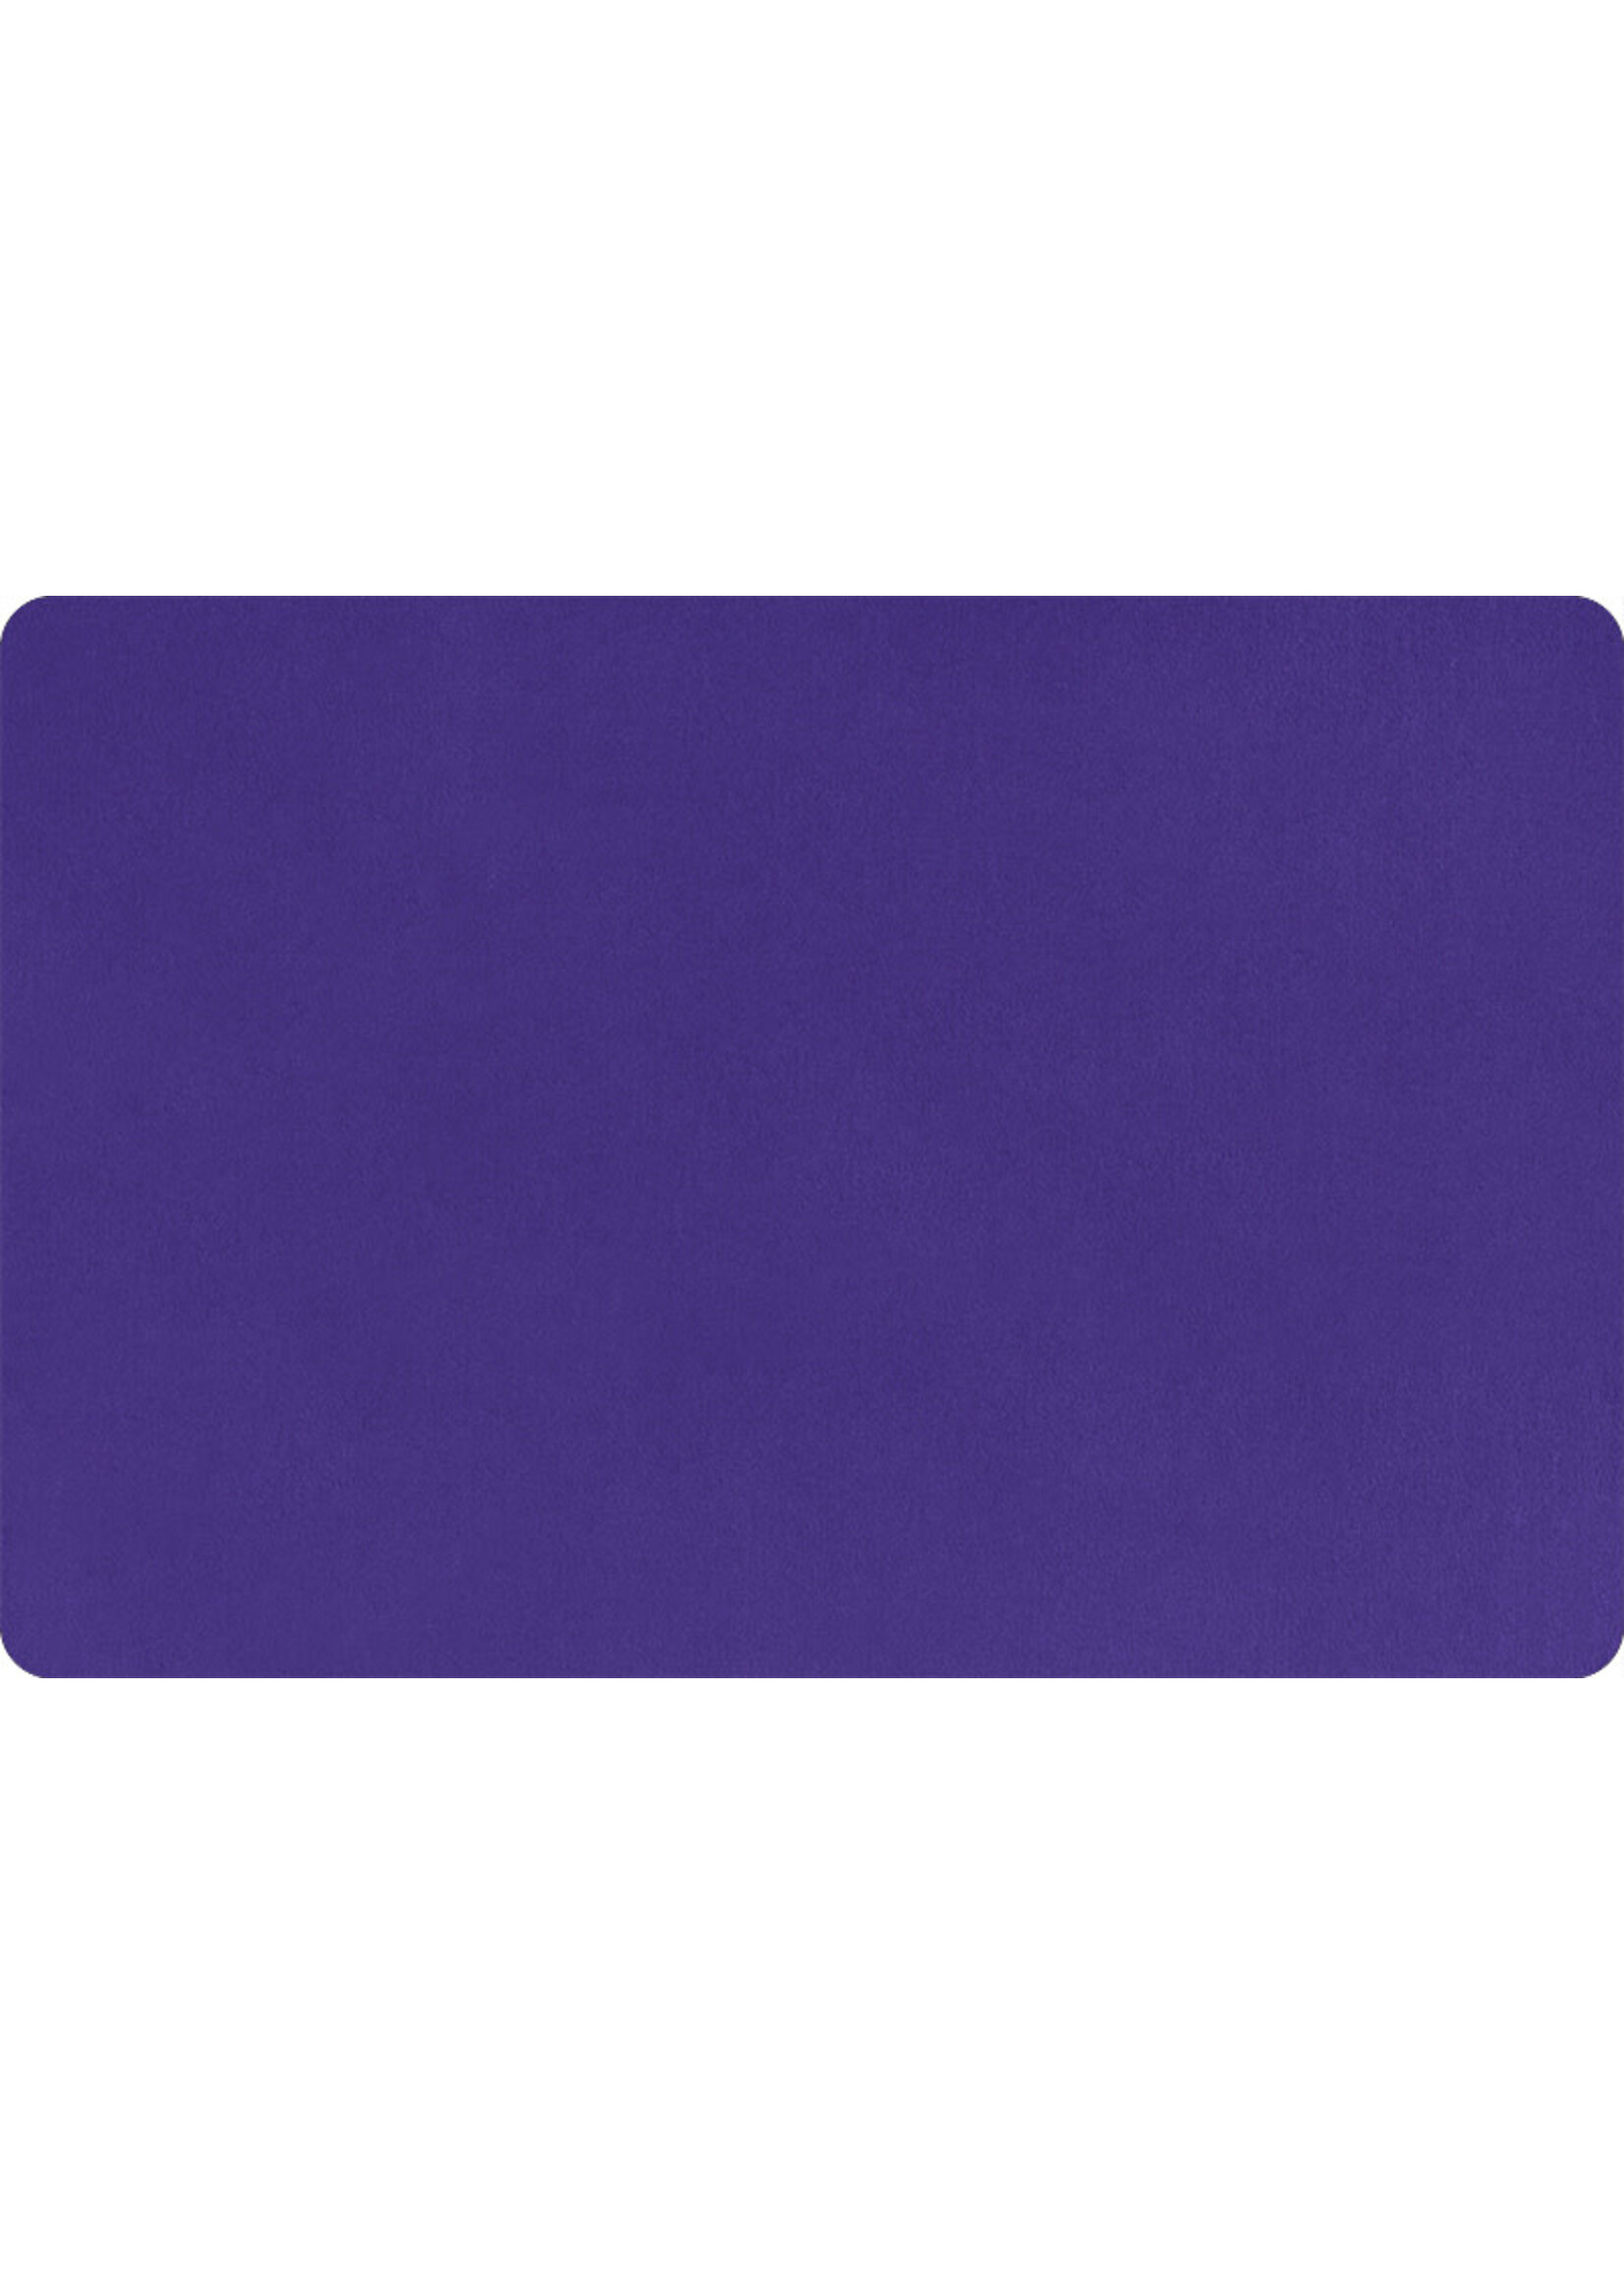 Shannon Fabrics Minky, Extra Wide Solid Cuddle3, 90" Viola, (by the inch)